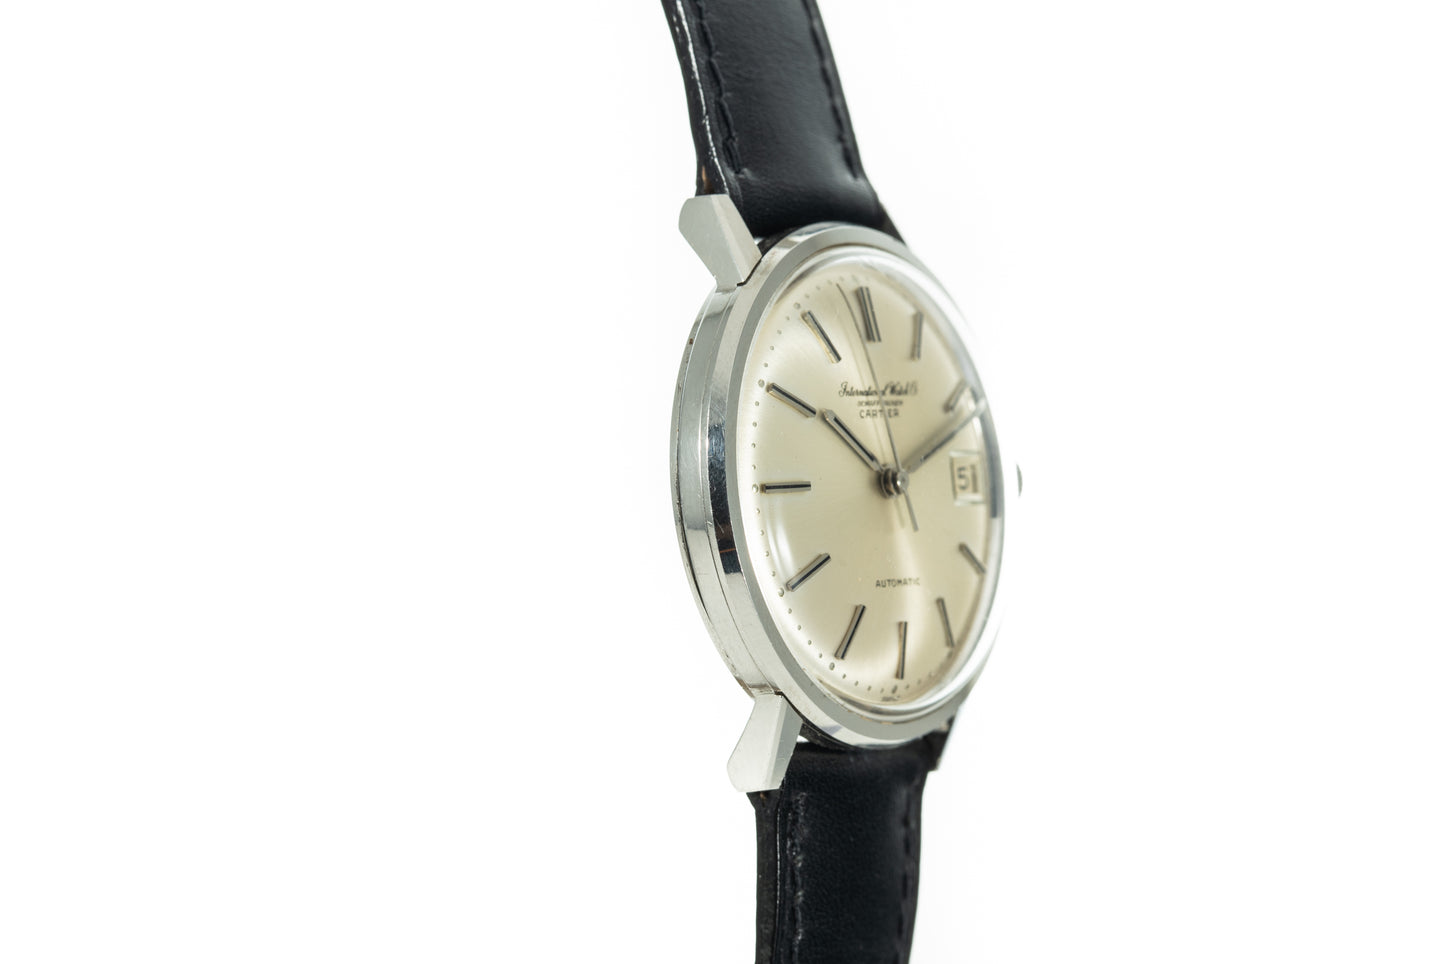 IWC Gent's Dress Watch Retailed by Cartier